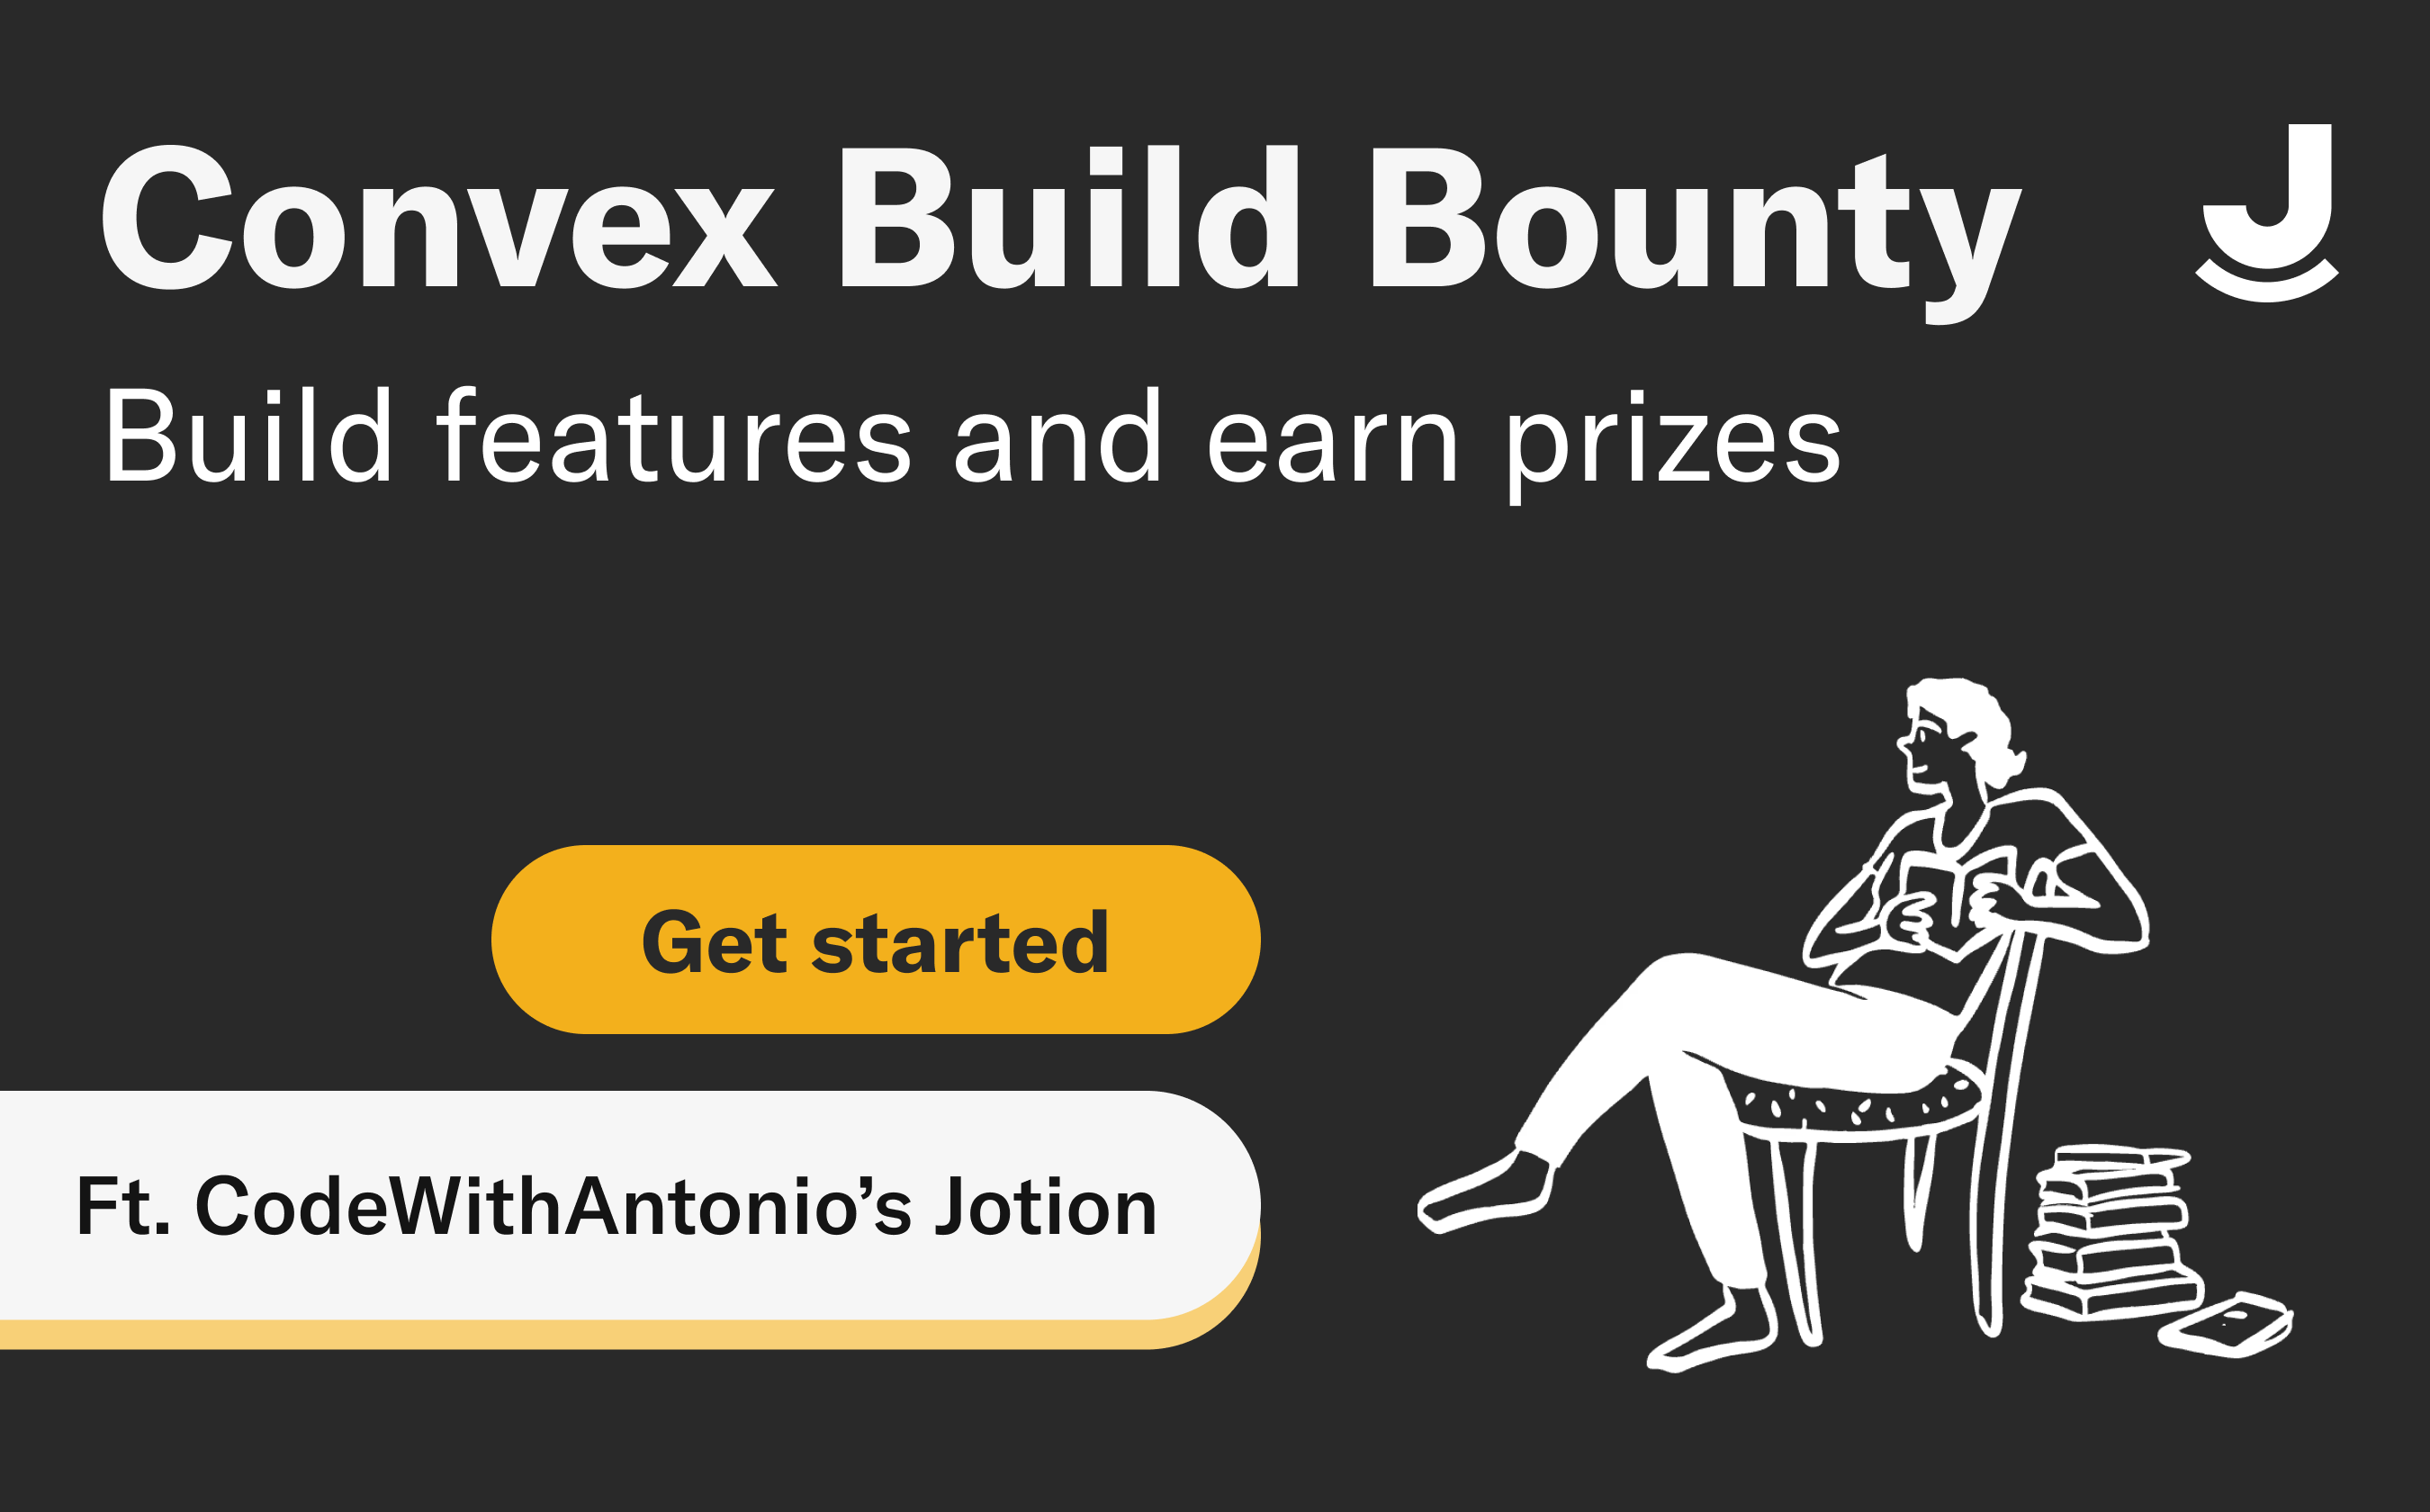 Convex Build Bounty for CodeWithAntonio's Jotion: Build features and earn prizes